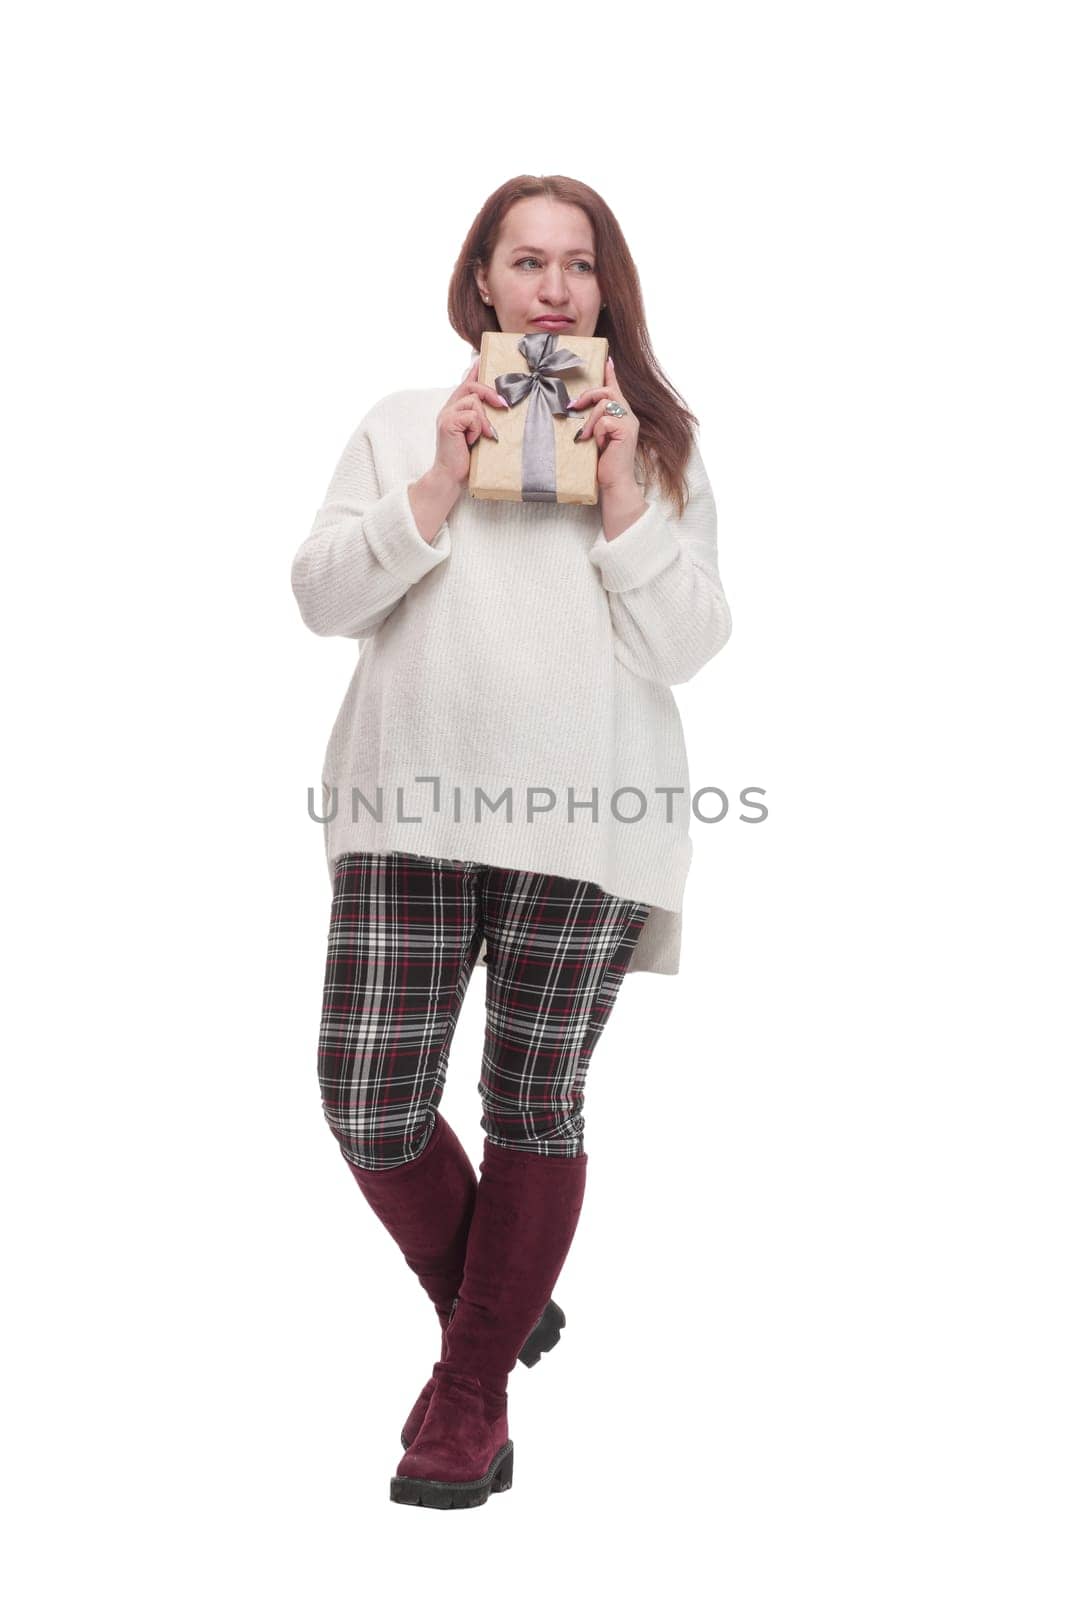 in full growth. attractive casual woman with a gift box .isolated on a white background.